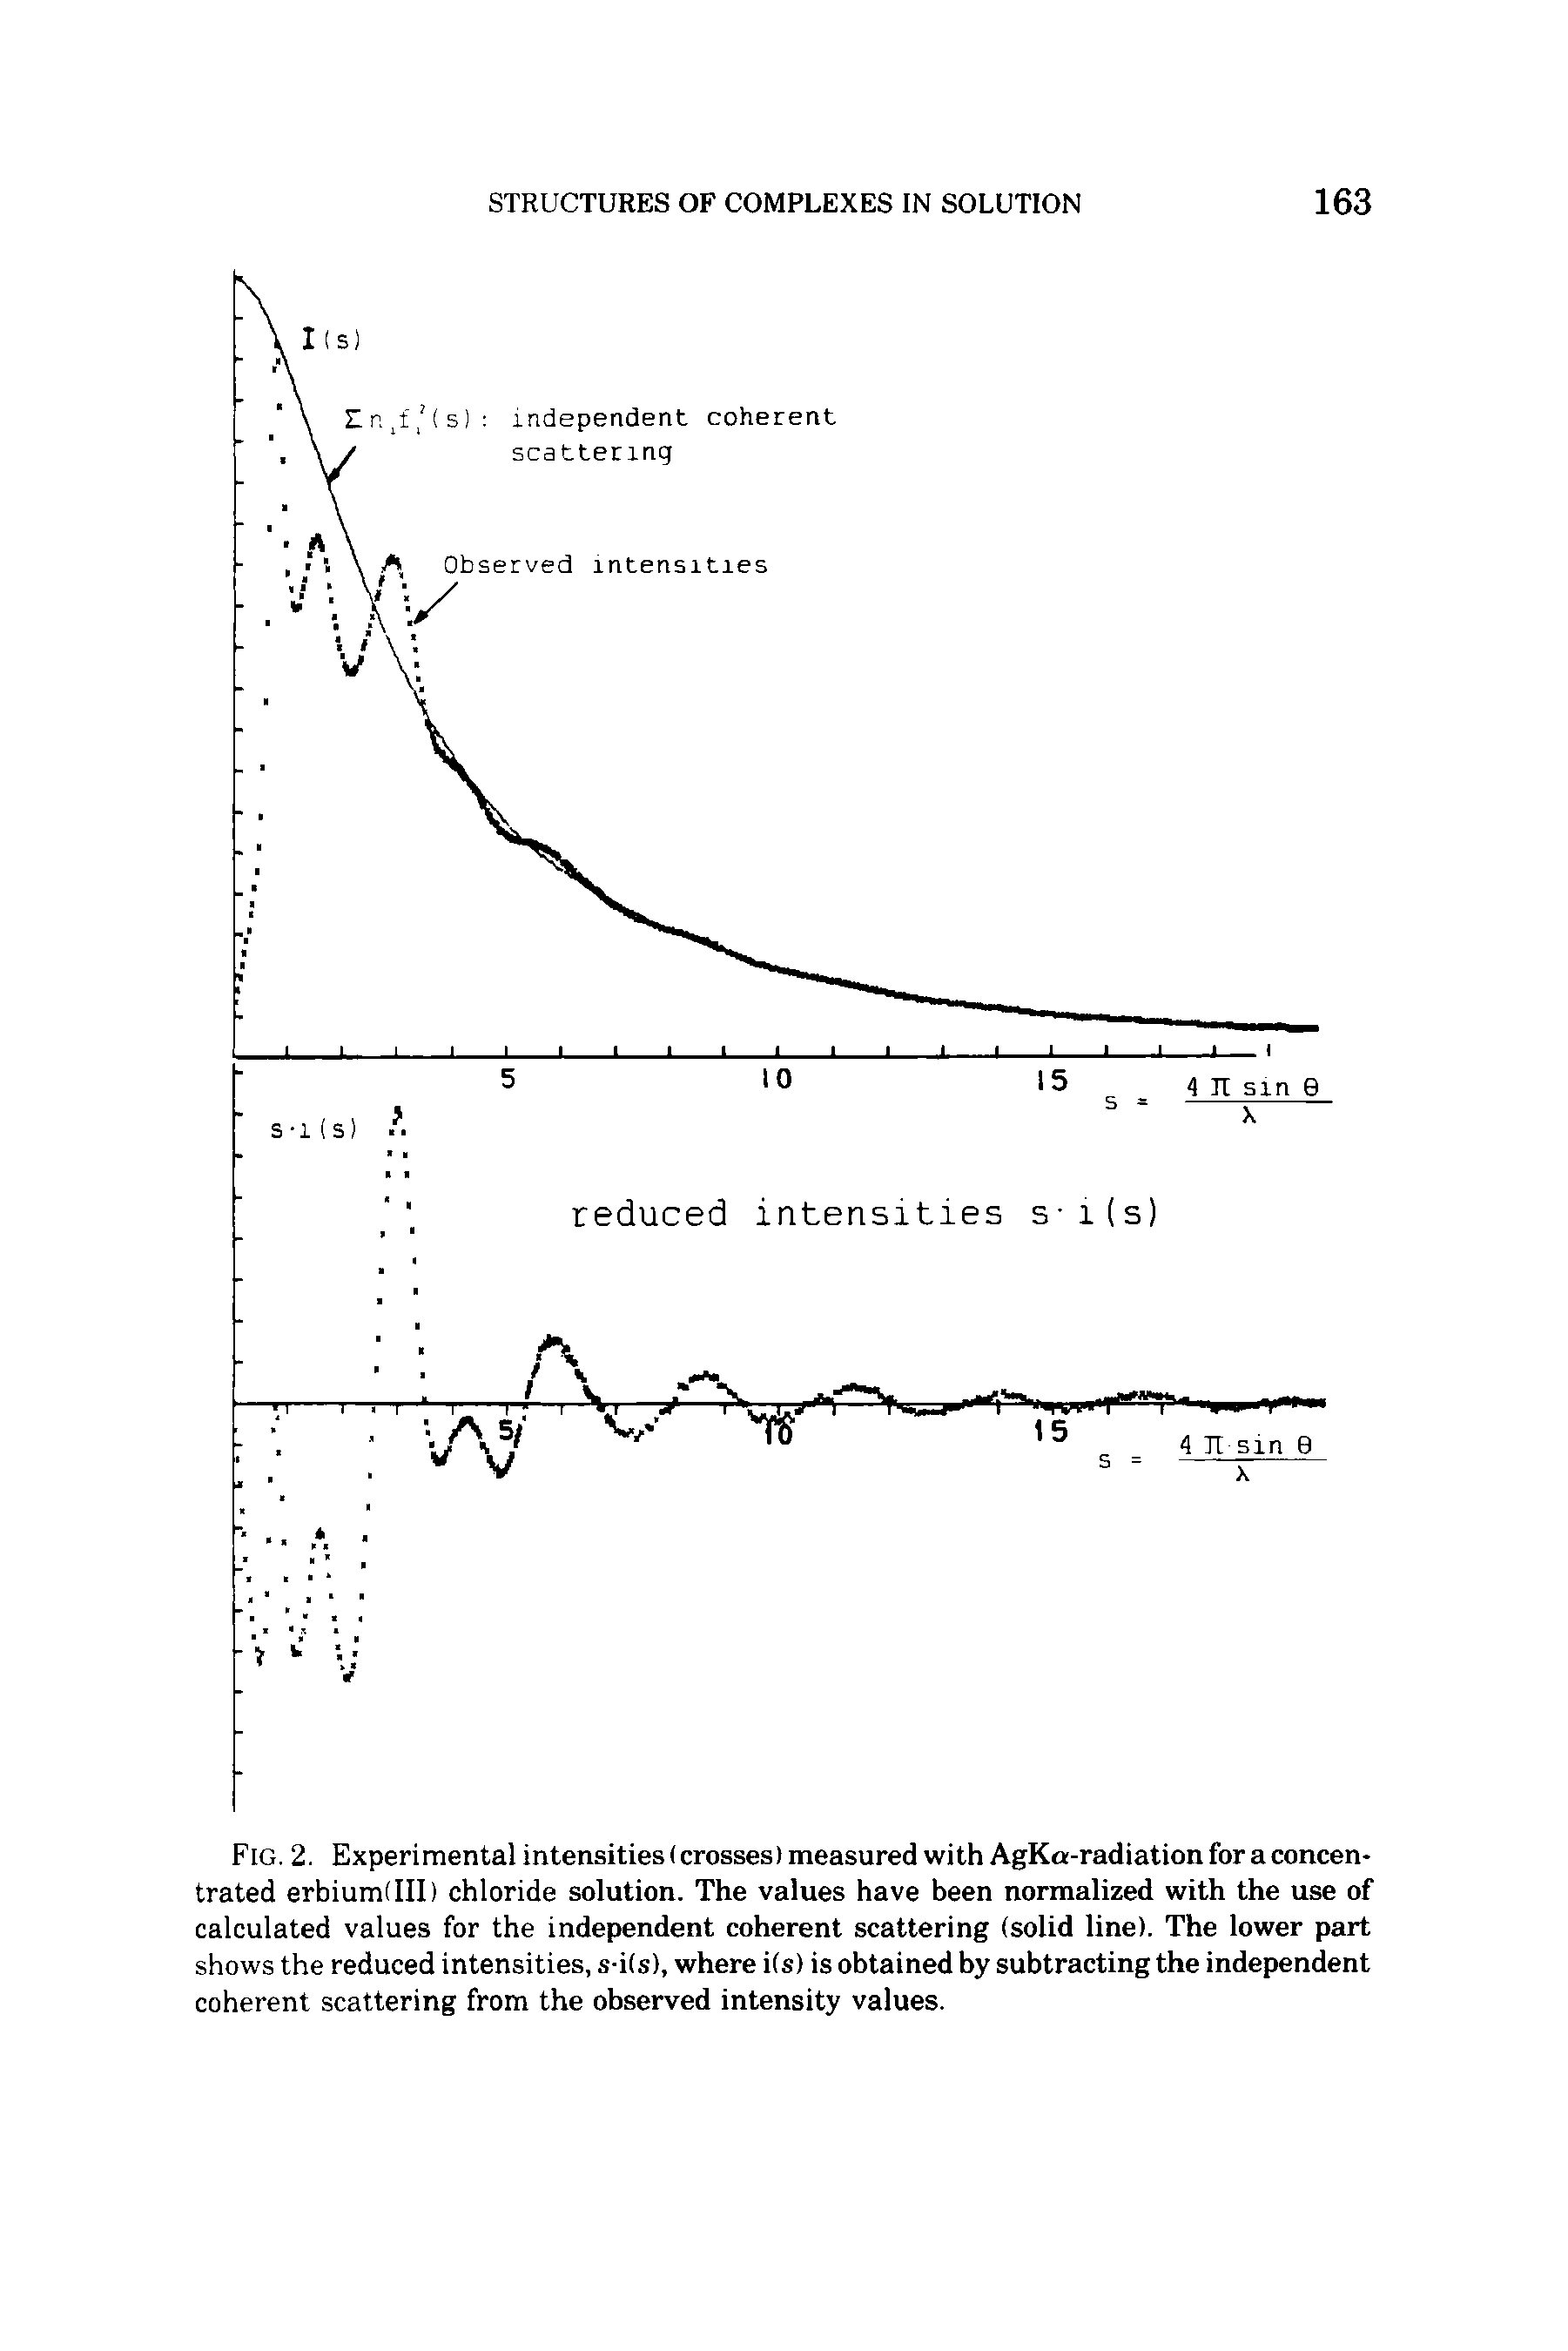 Fig. 2. Experimental intensities (crosses) measured with AgKa-radiation for aconcen-trated erbium(III) chloride solution. The values have been normalized with the use of calculated values for the independent coherent scattering (solid line). The lower part shows the reduced intensities, s-i(s), where its) is obtained by subtracting the independent coherent scattering from the observed intensity values.